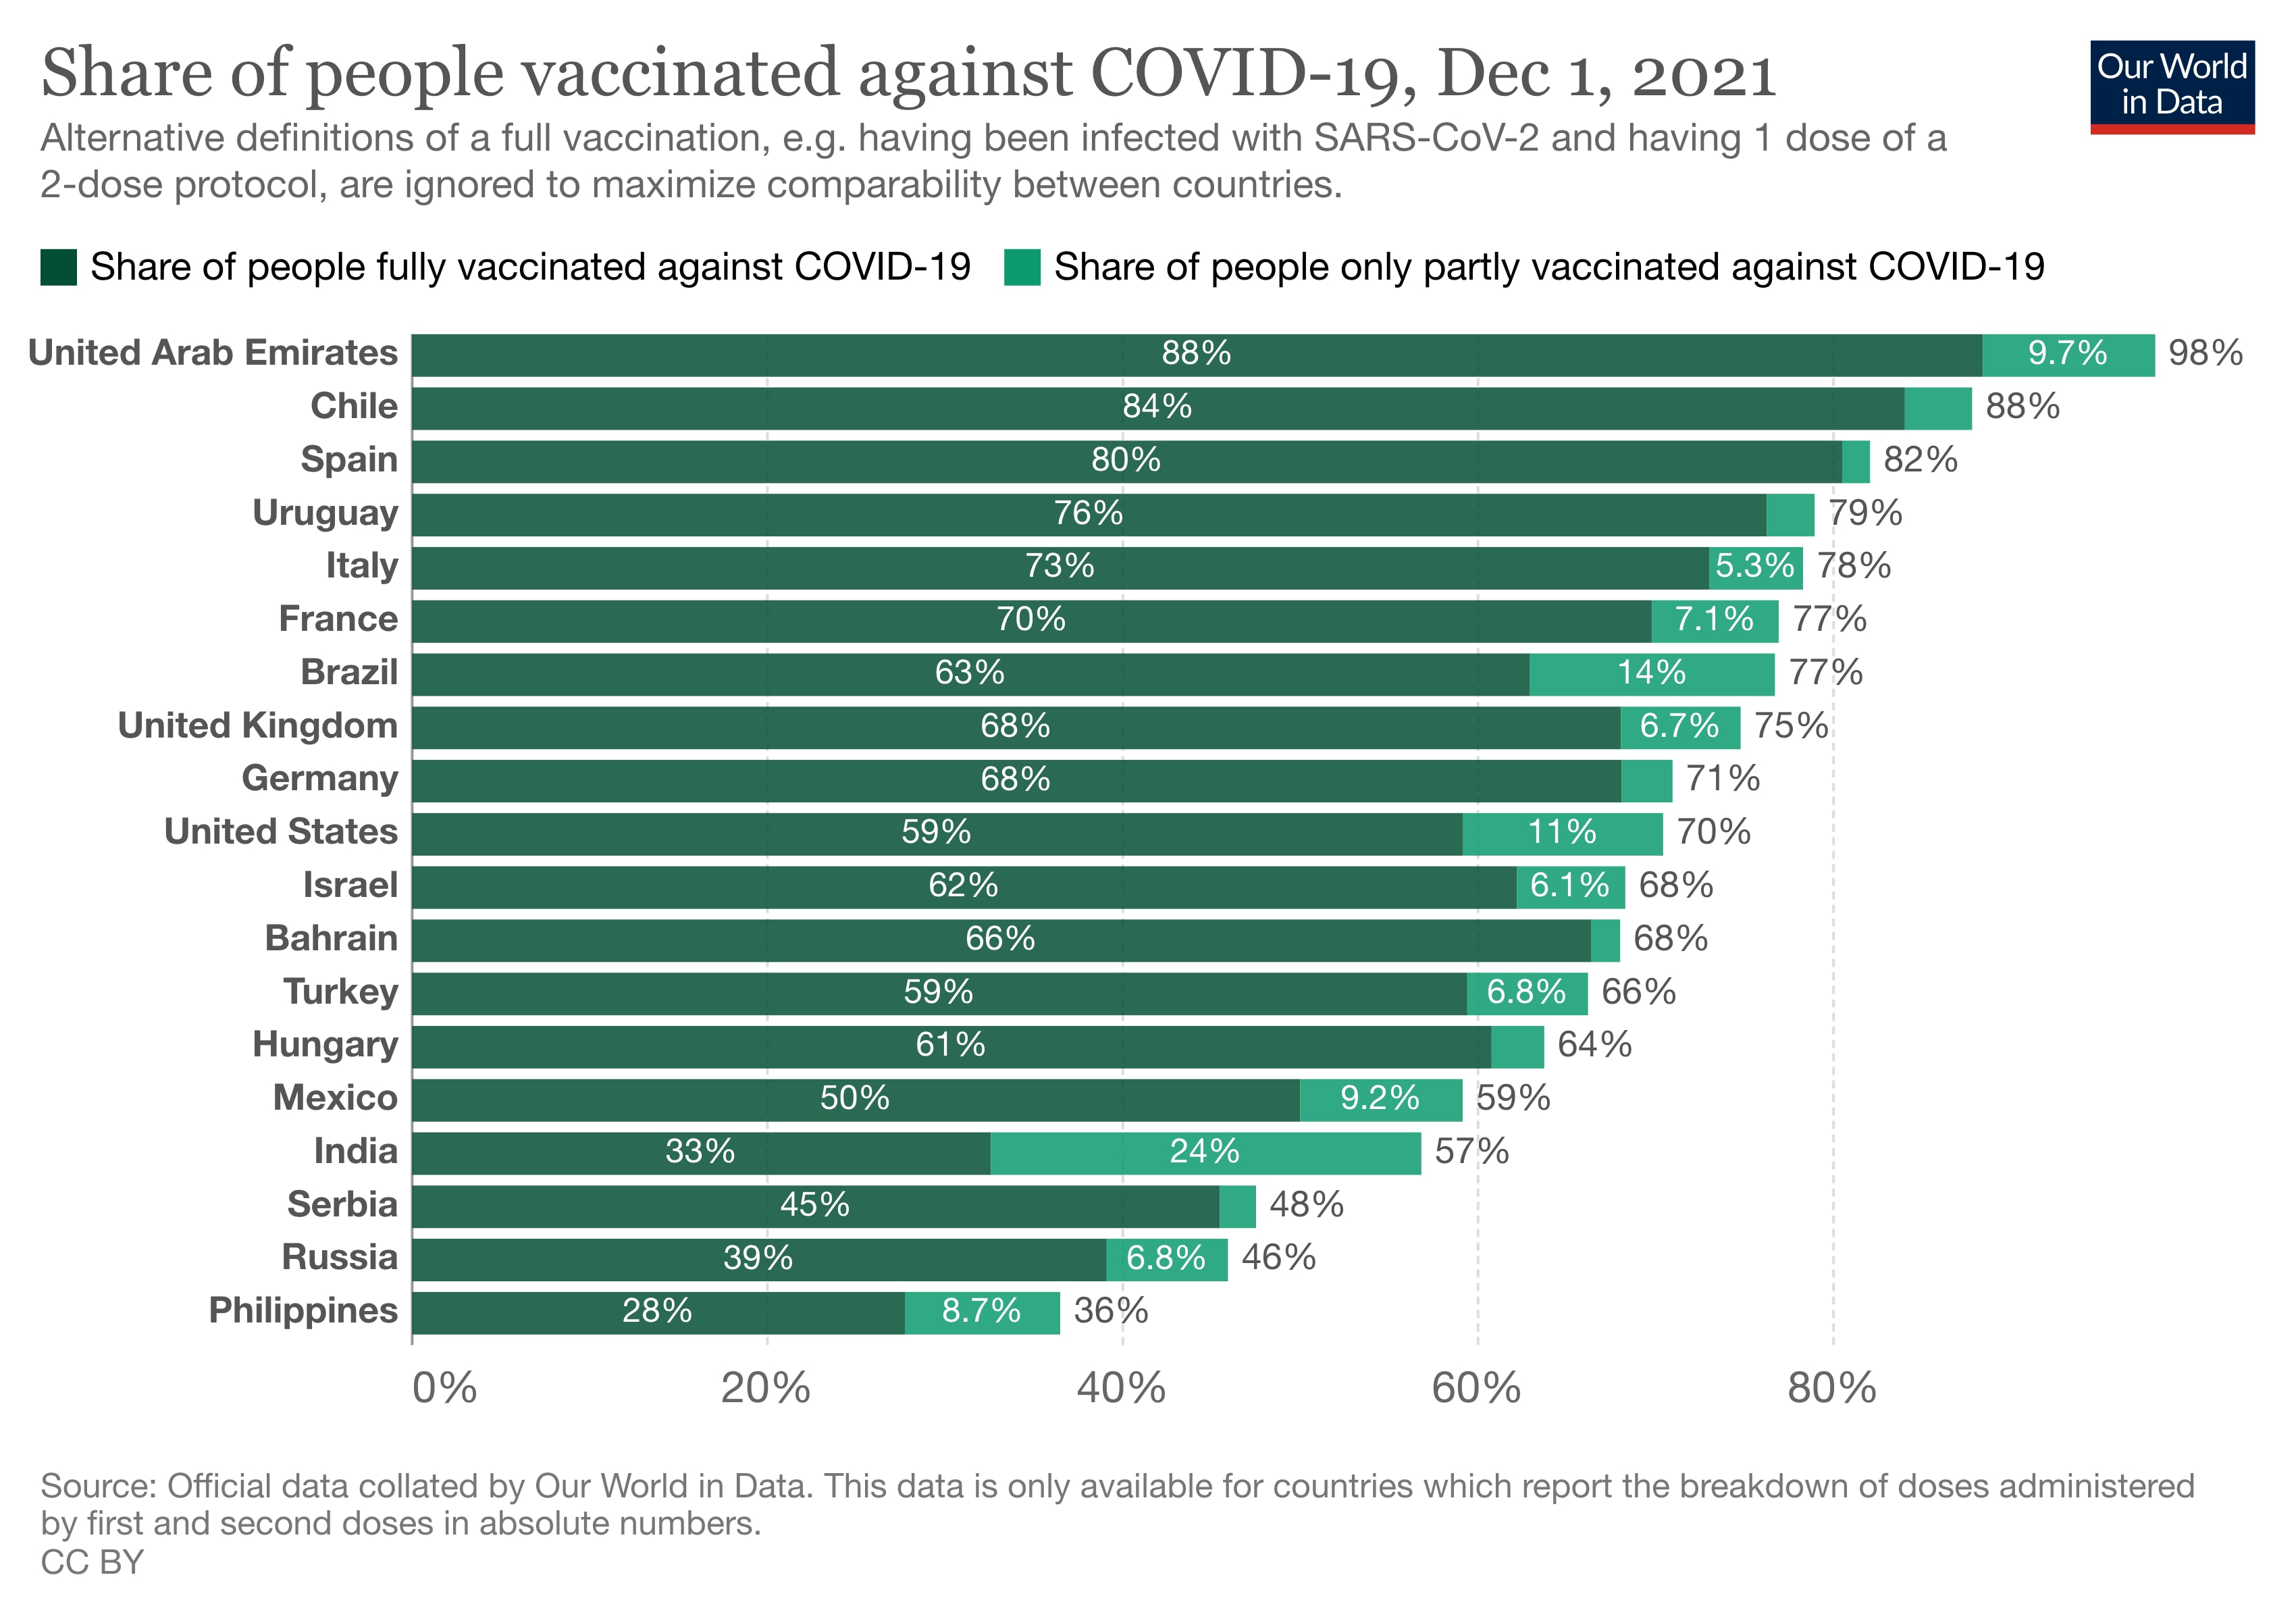 Share of people vaccinated against COVID-19 relative to population, Dec 1, 2021. From Our World in Data